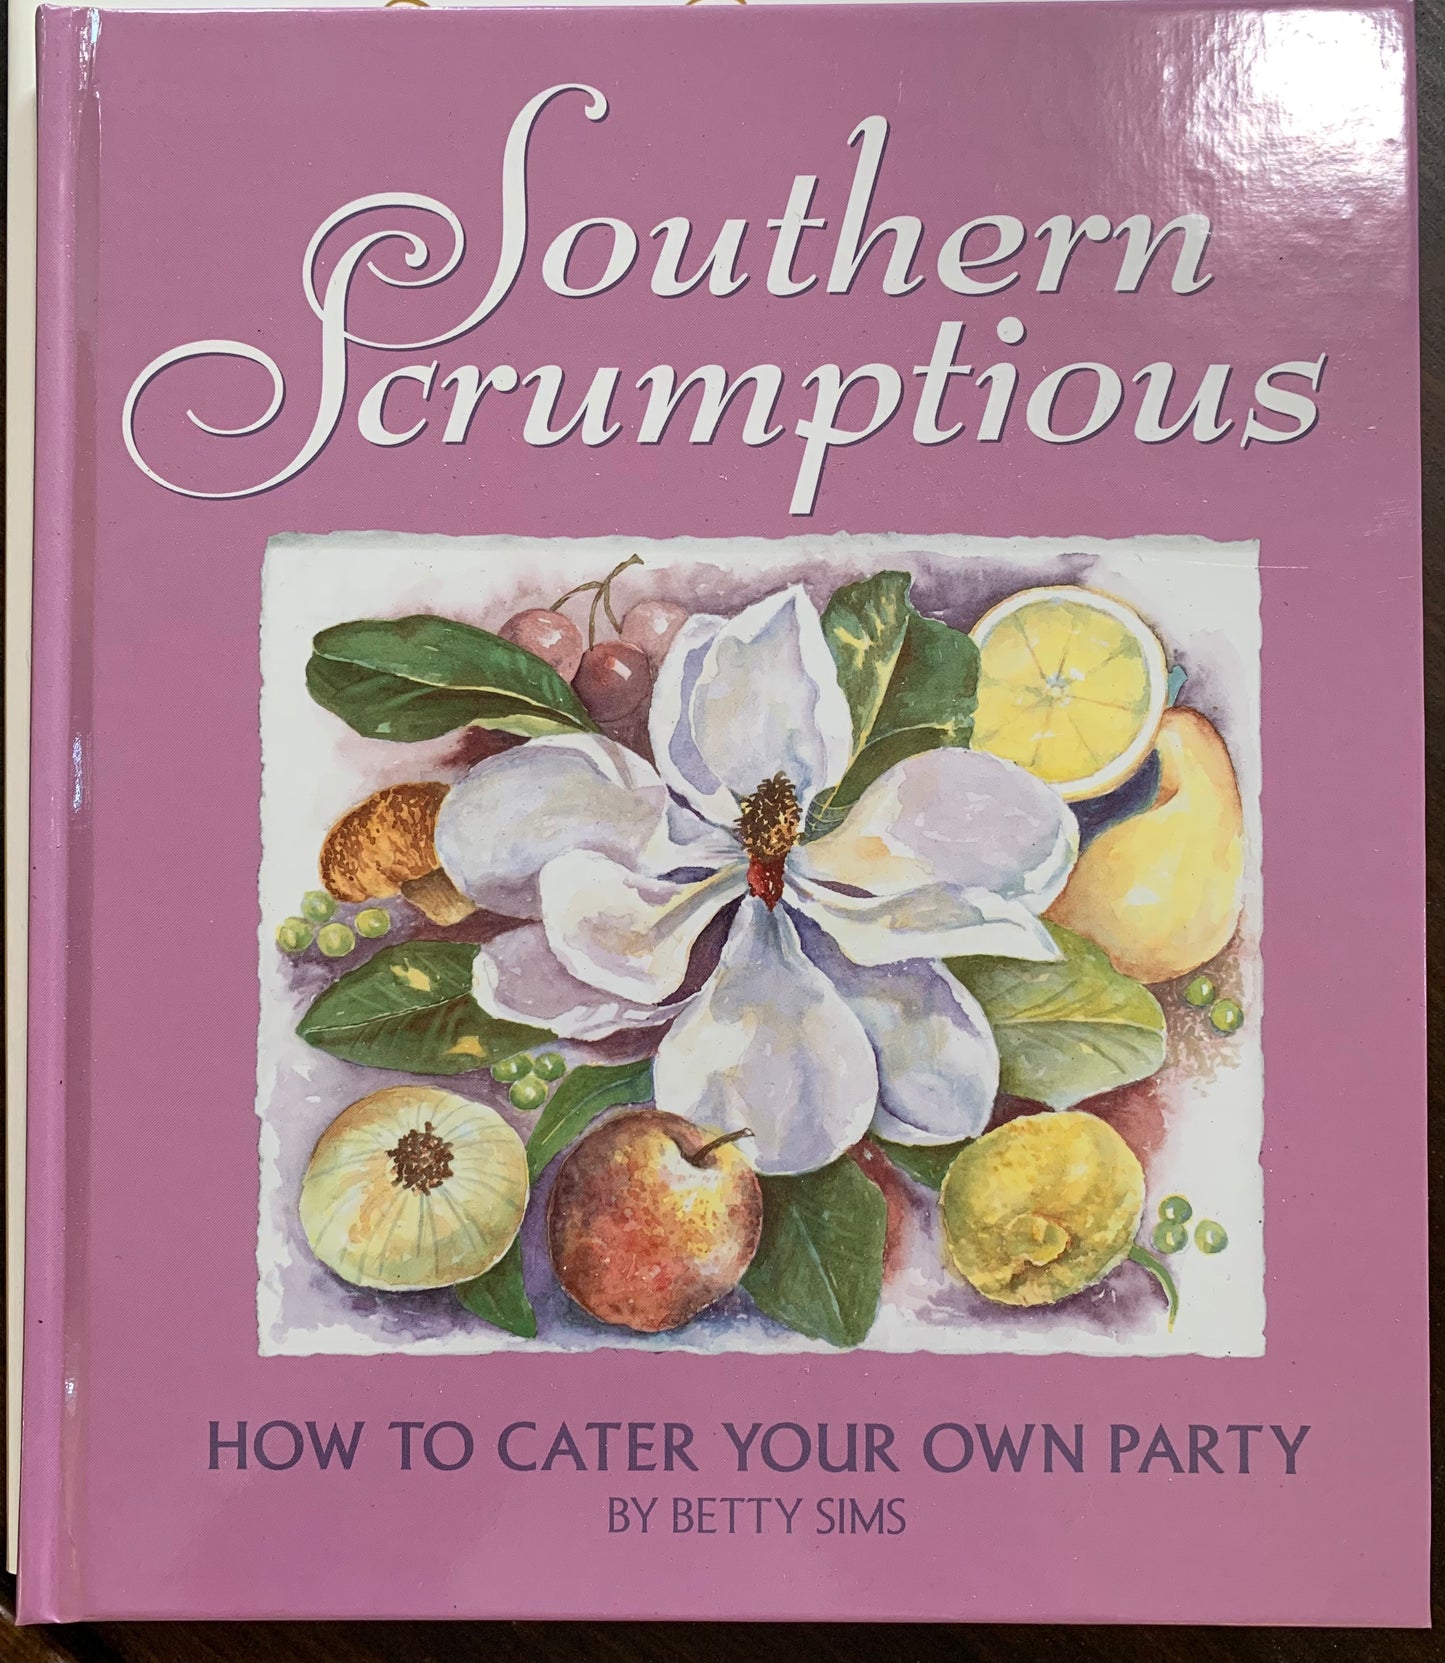 Southern Scrumptious (How to cater your own party)